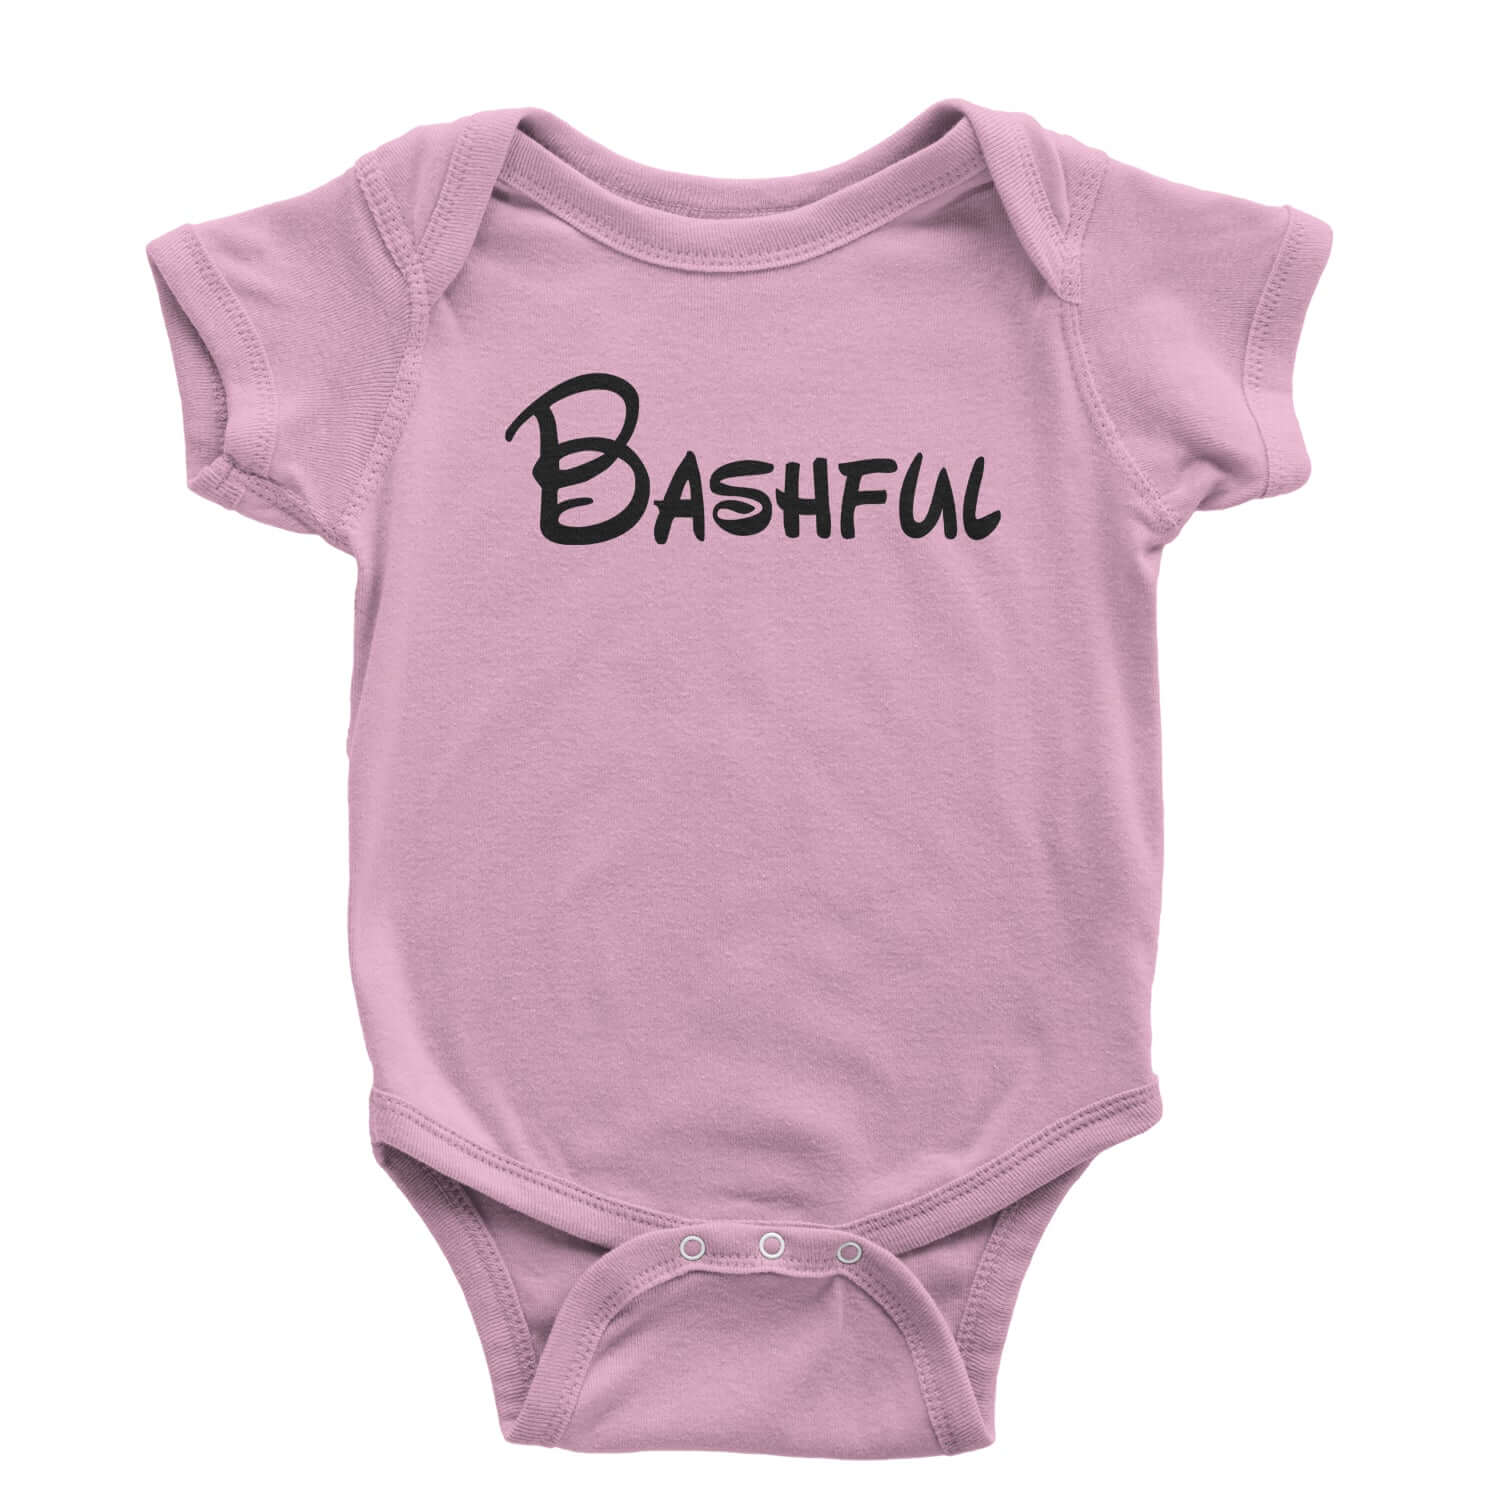 Bashful - 7 Dwarfs Costume Infant One-Piece Romper Bodysuit and, costume, dwarfs, group, halloween, matching, seven, snow, the, white by Expression Tees